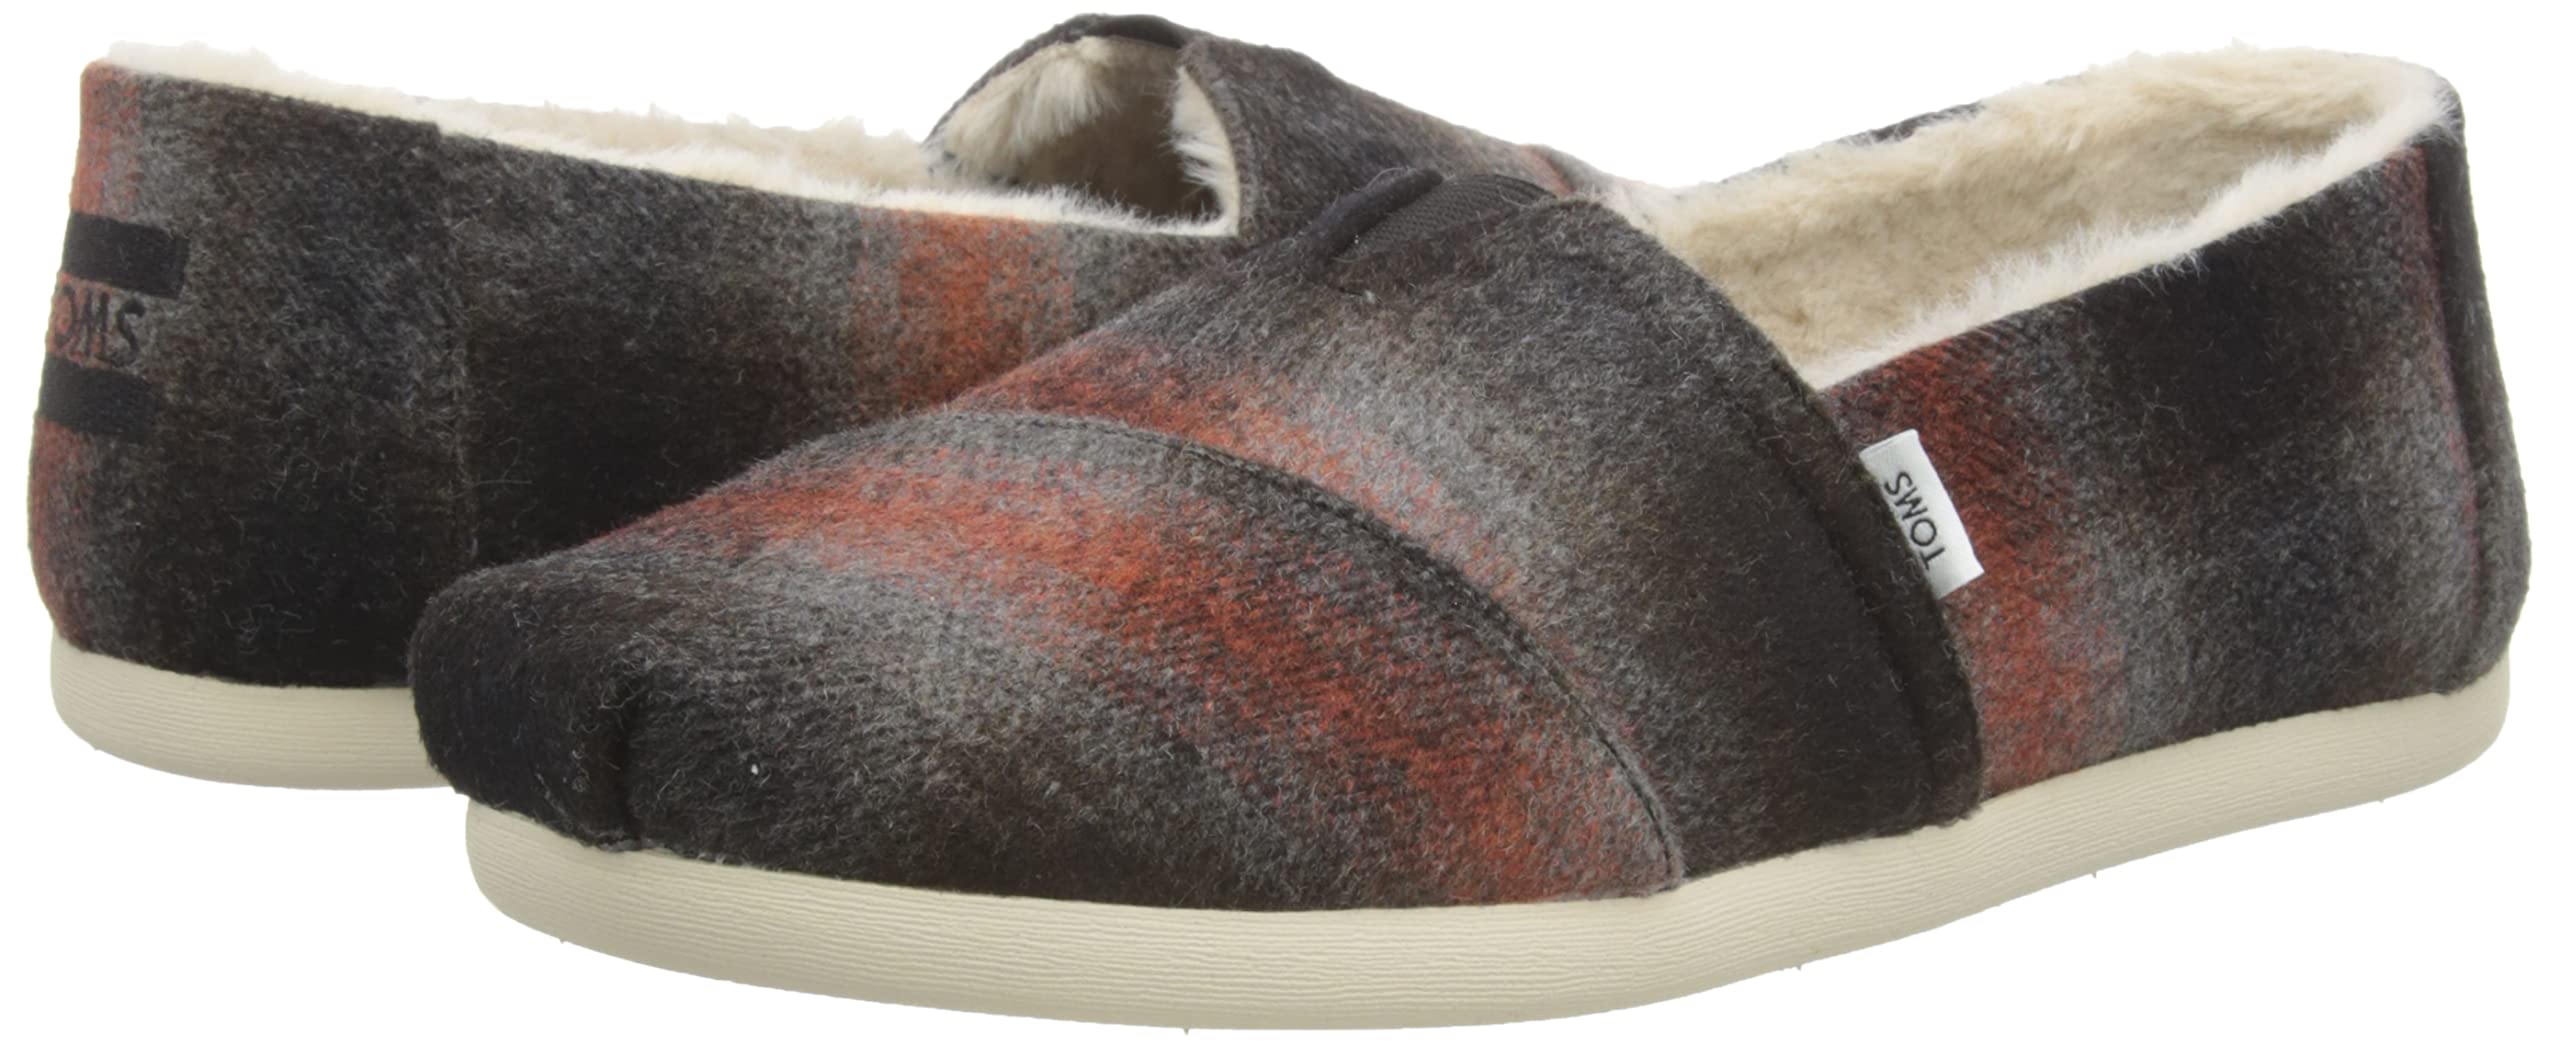 TOMS Men's Alpargata Recycled Cotton Canvas” Loafer Flat